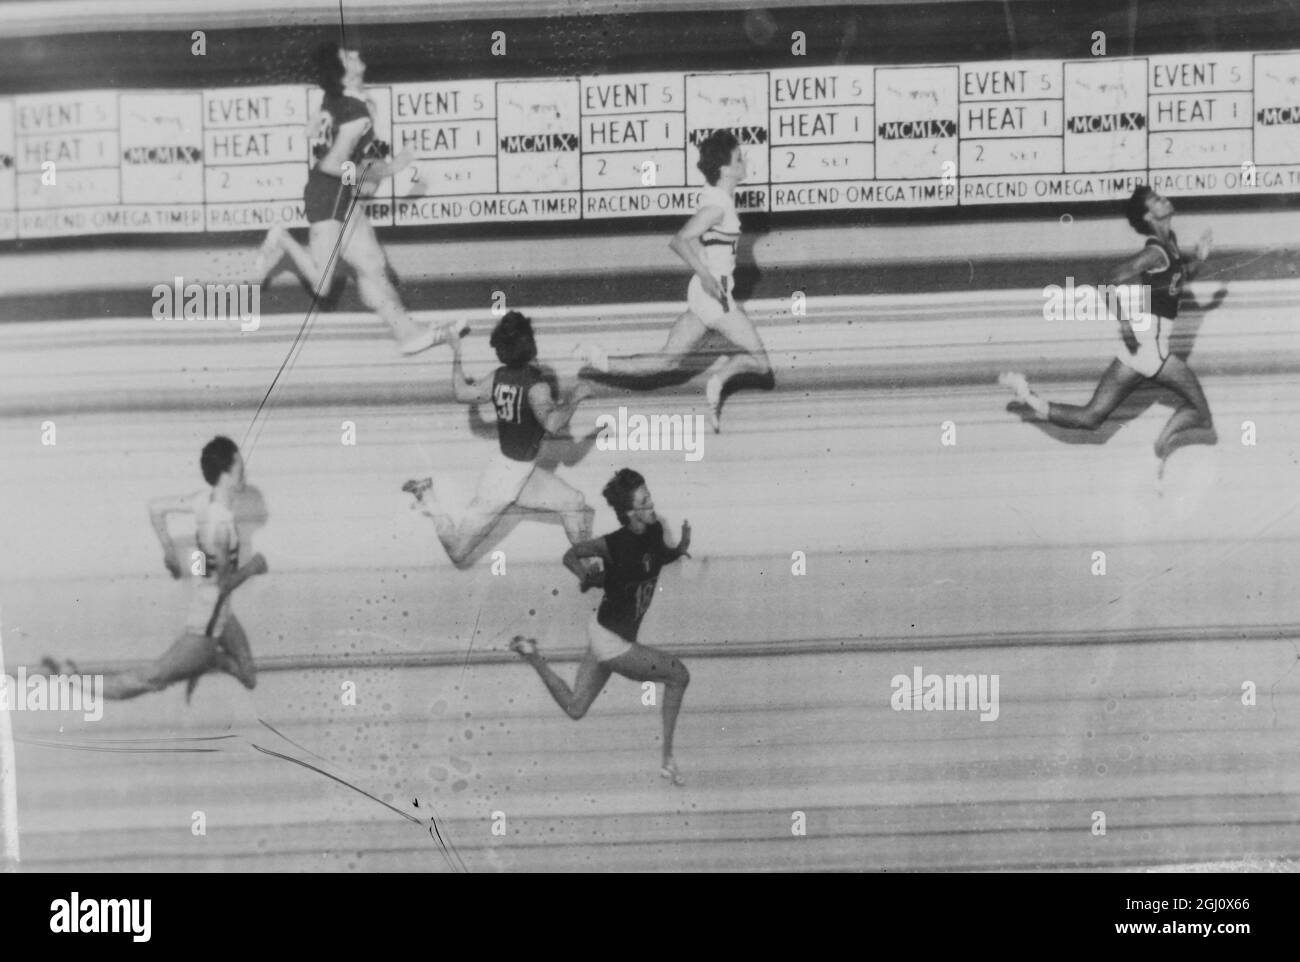 OLYMPIC GAME 100M WOMEN FINAL RUDOLPH WINS HYMAN OTHERS 3 SEPTEMBER 1960 Stock Photo